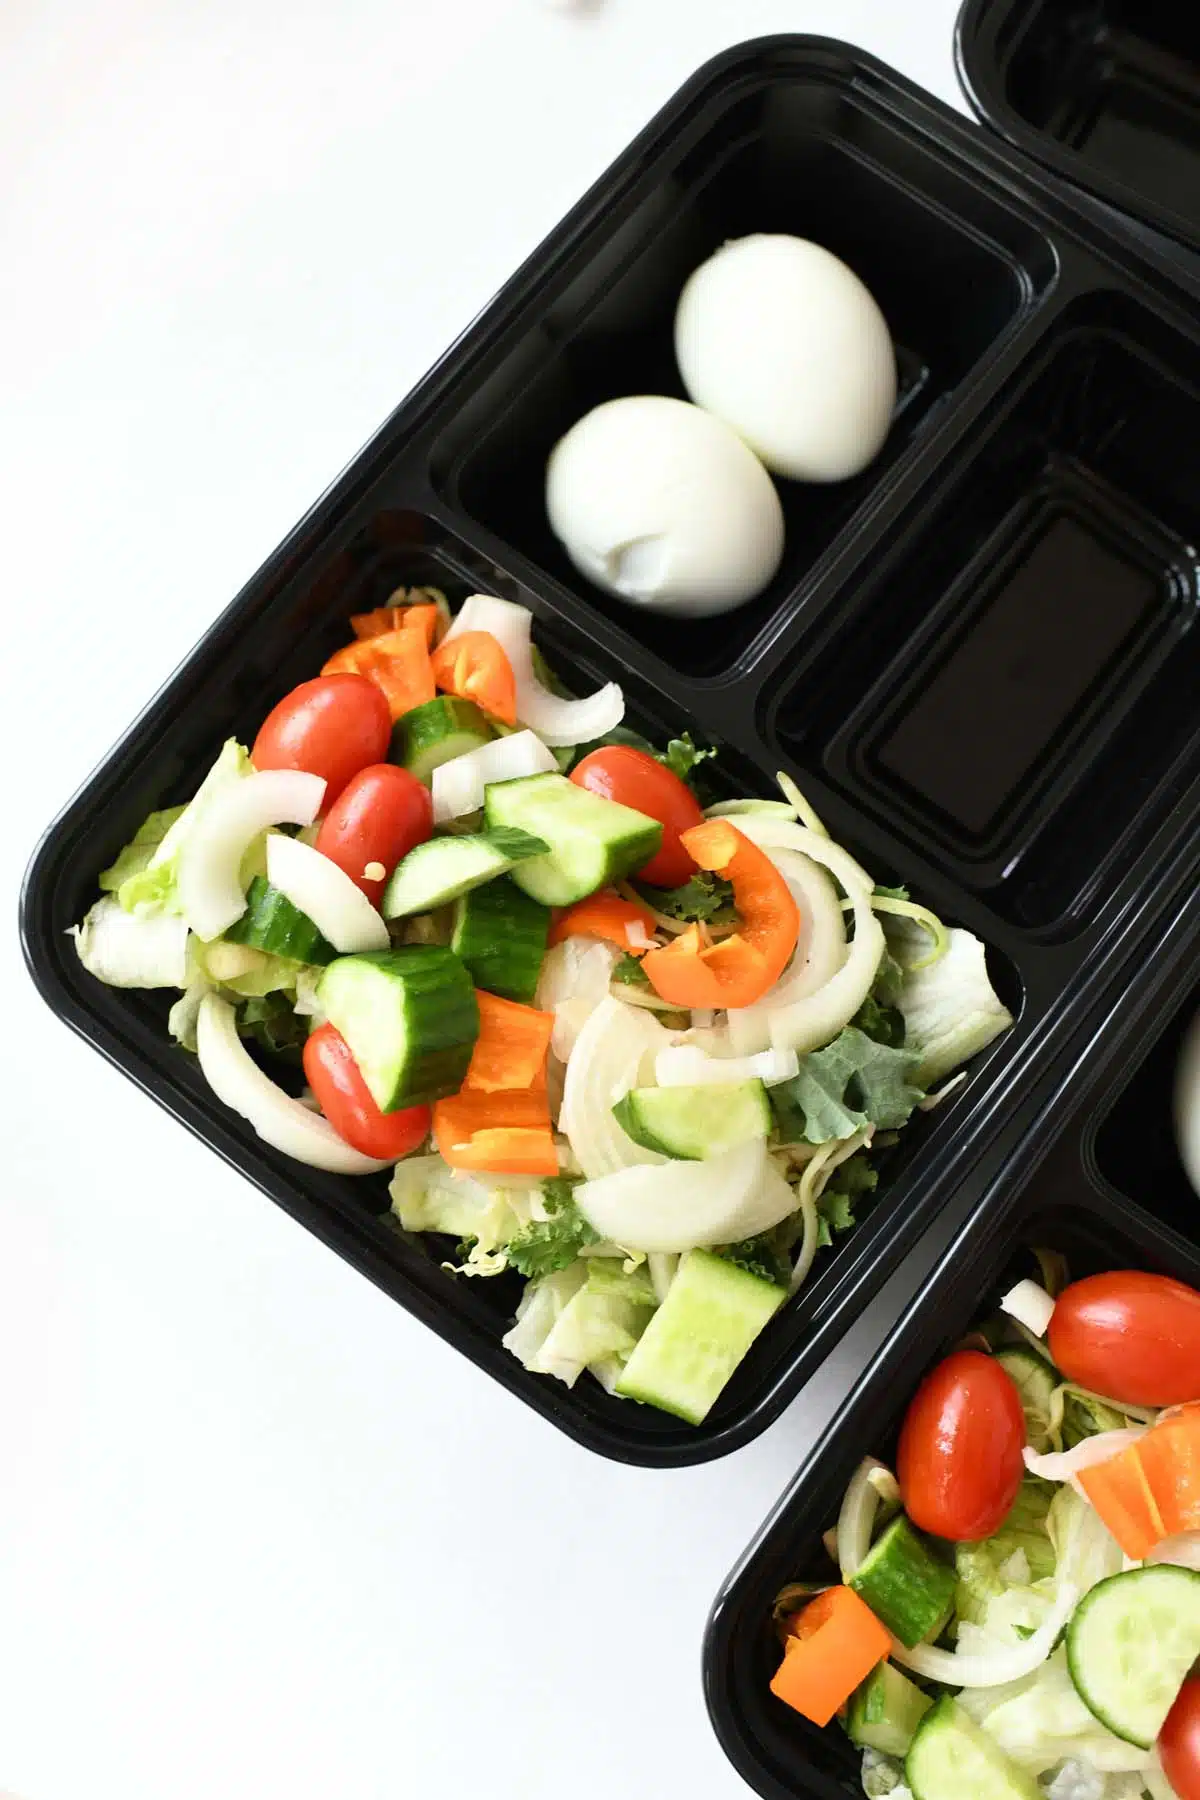 A garden salad in a meal prep container.